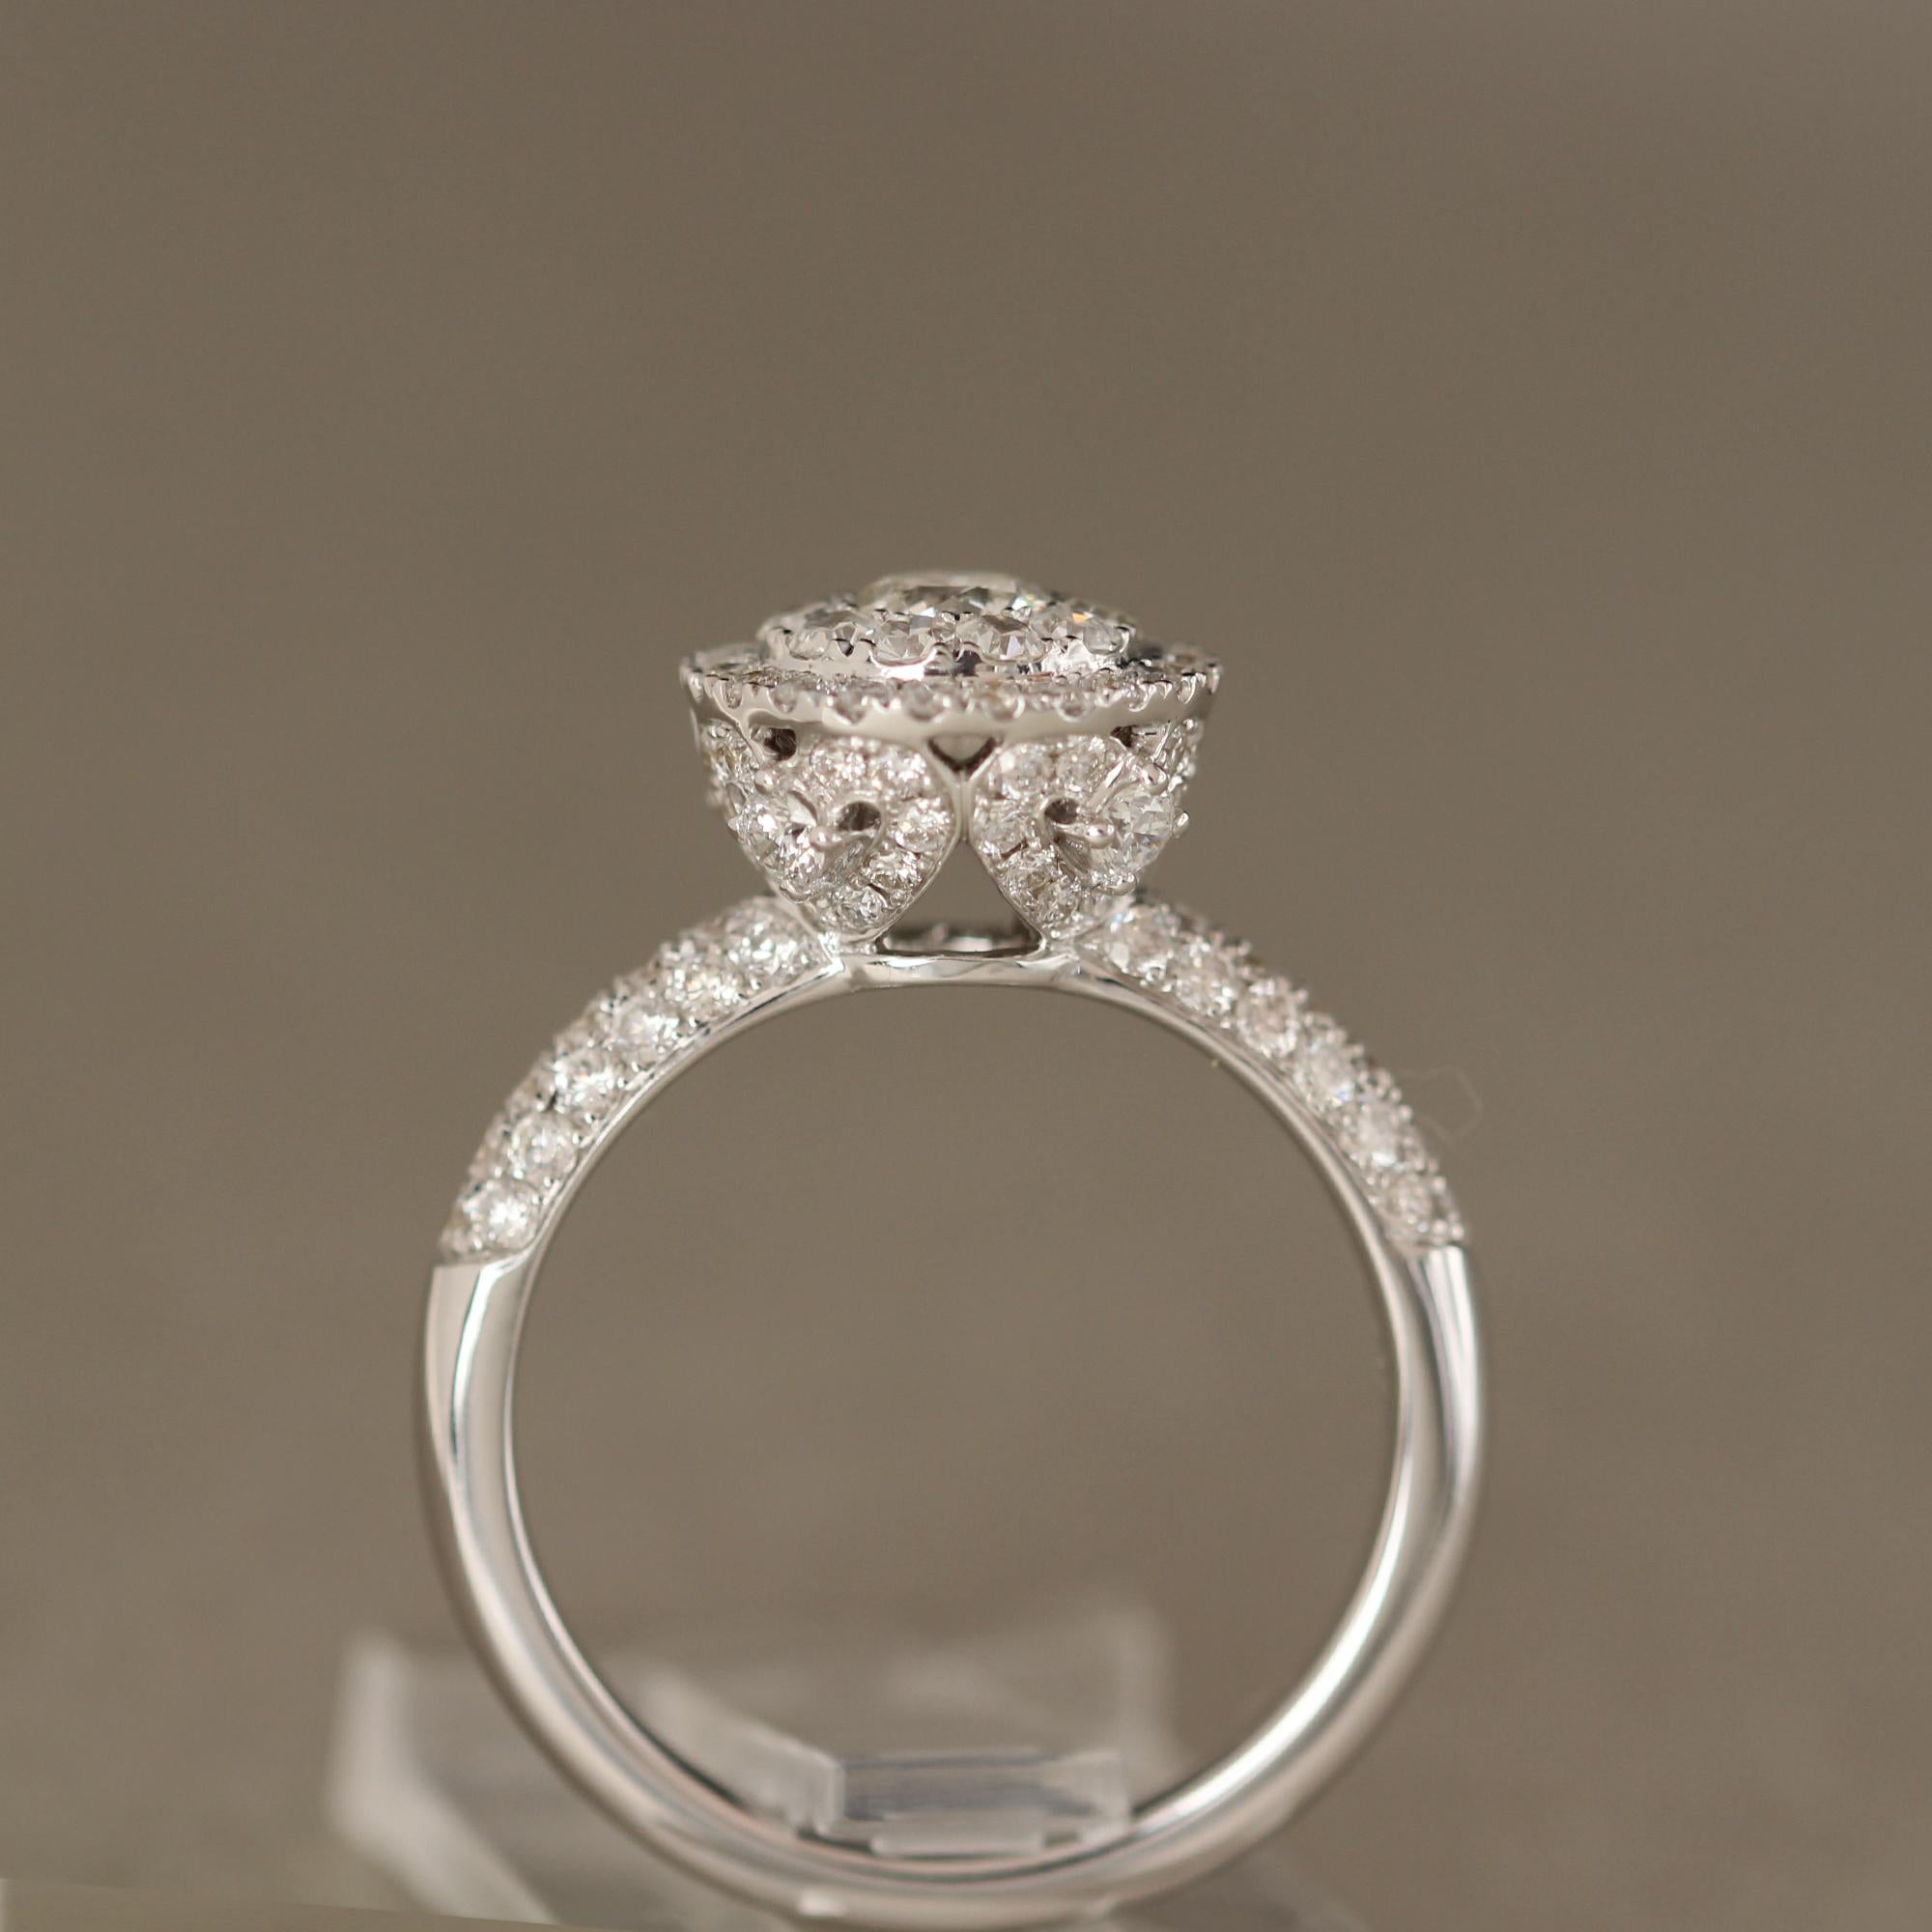 High Quality Diamond Ring - Super Cluster setting.
to the eye as a small distance the top area looks like one large Diamonds becuase of the pricision of the setting and the fine workmanship plus the sparkling white diamonds - all combine produced a